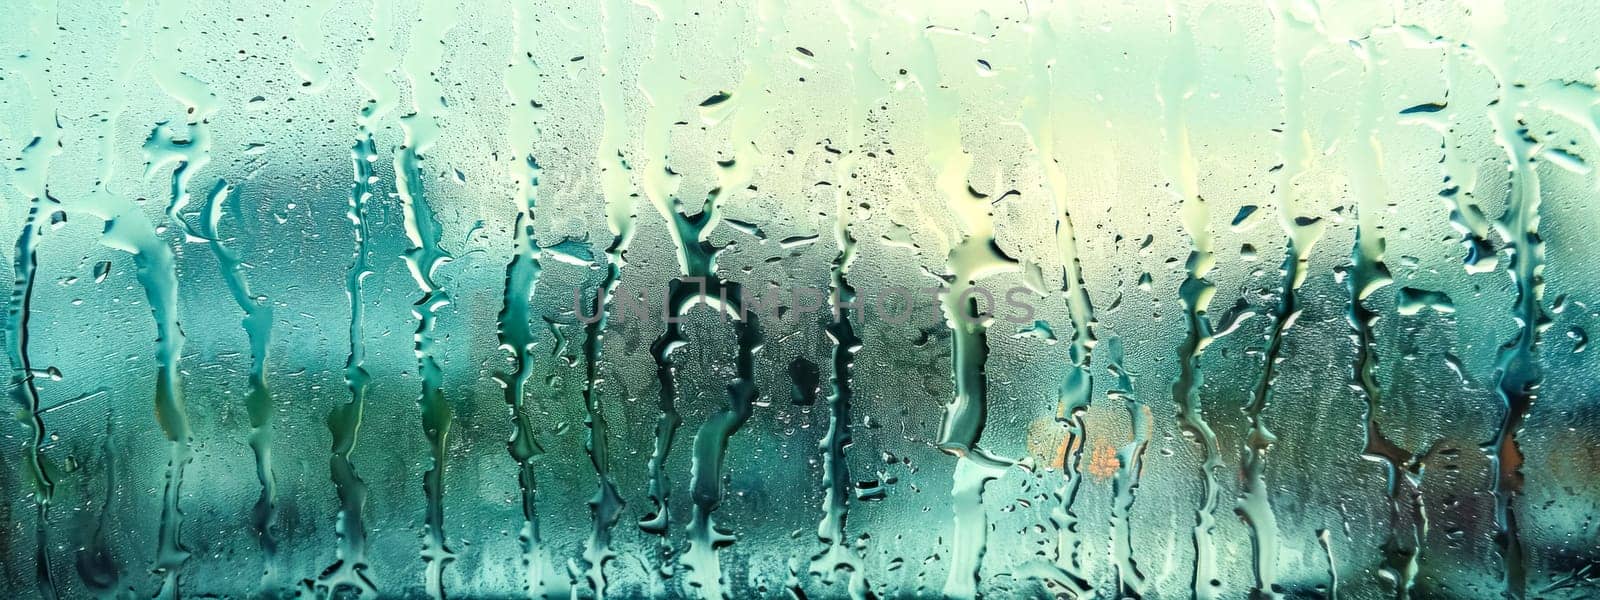 Raindrops on glass with blurred background by Edophoto